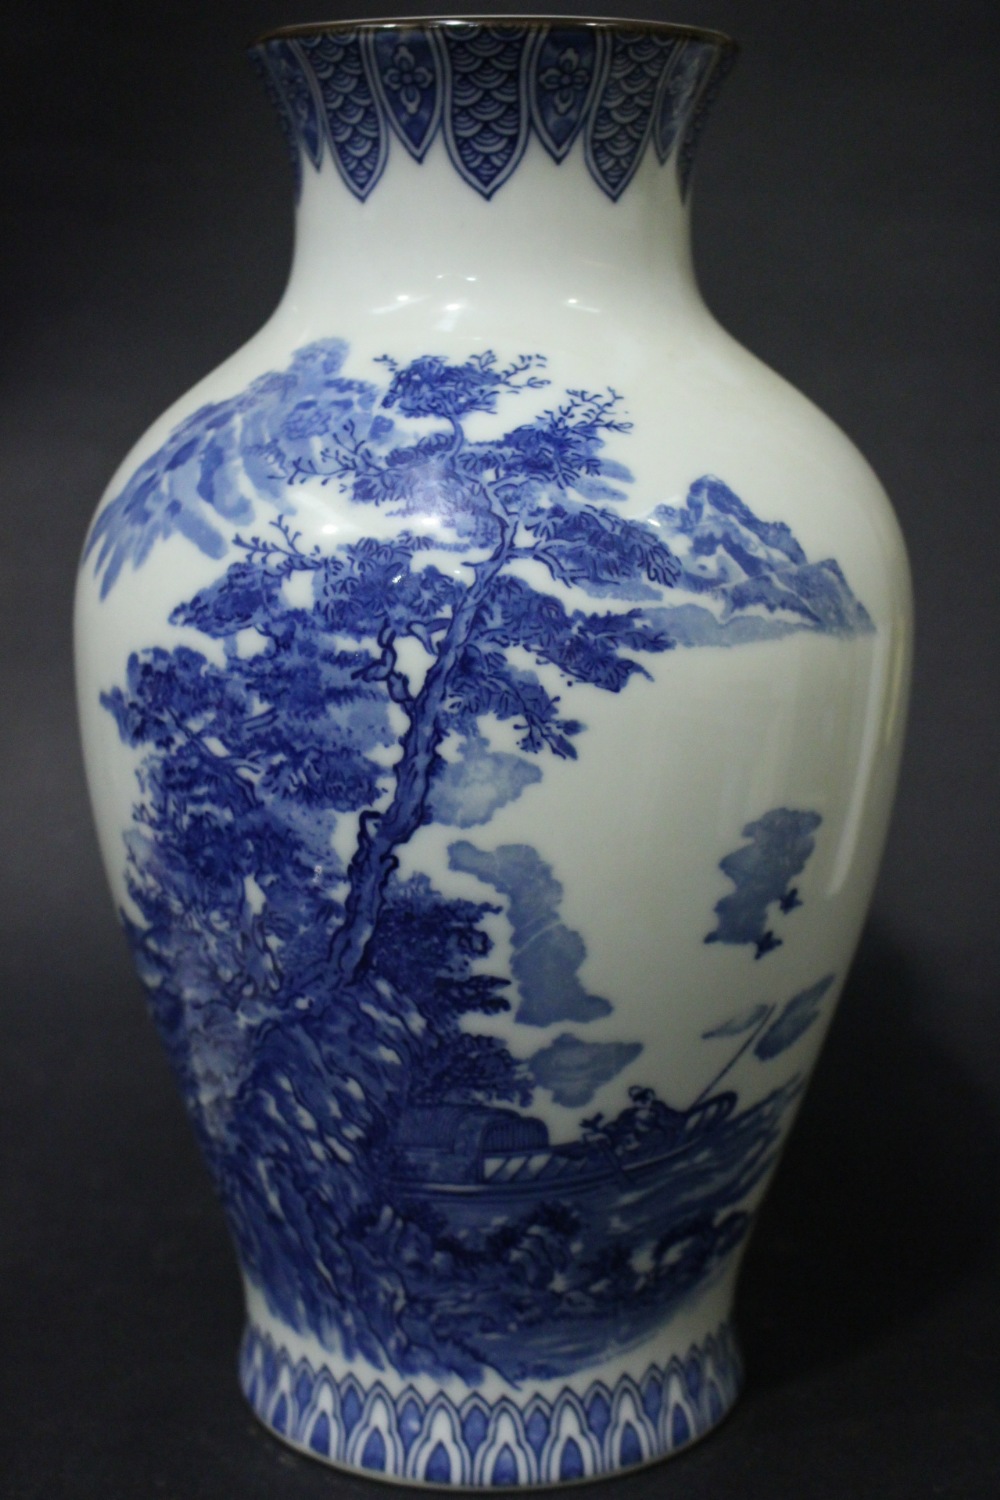 A JAPANESE BALUSTER SHAPED VASE, with blue & white colouring, having a large image of a wooded